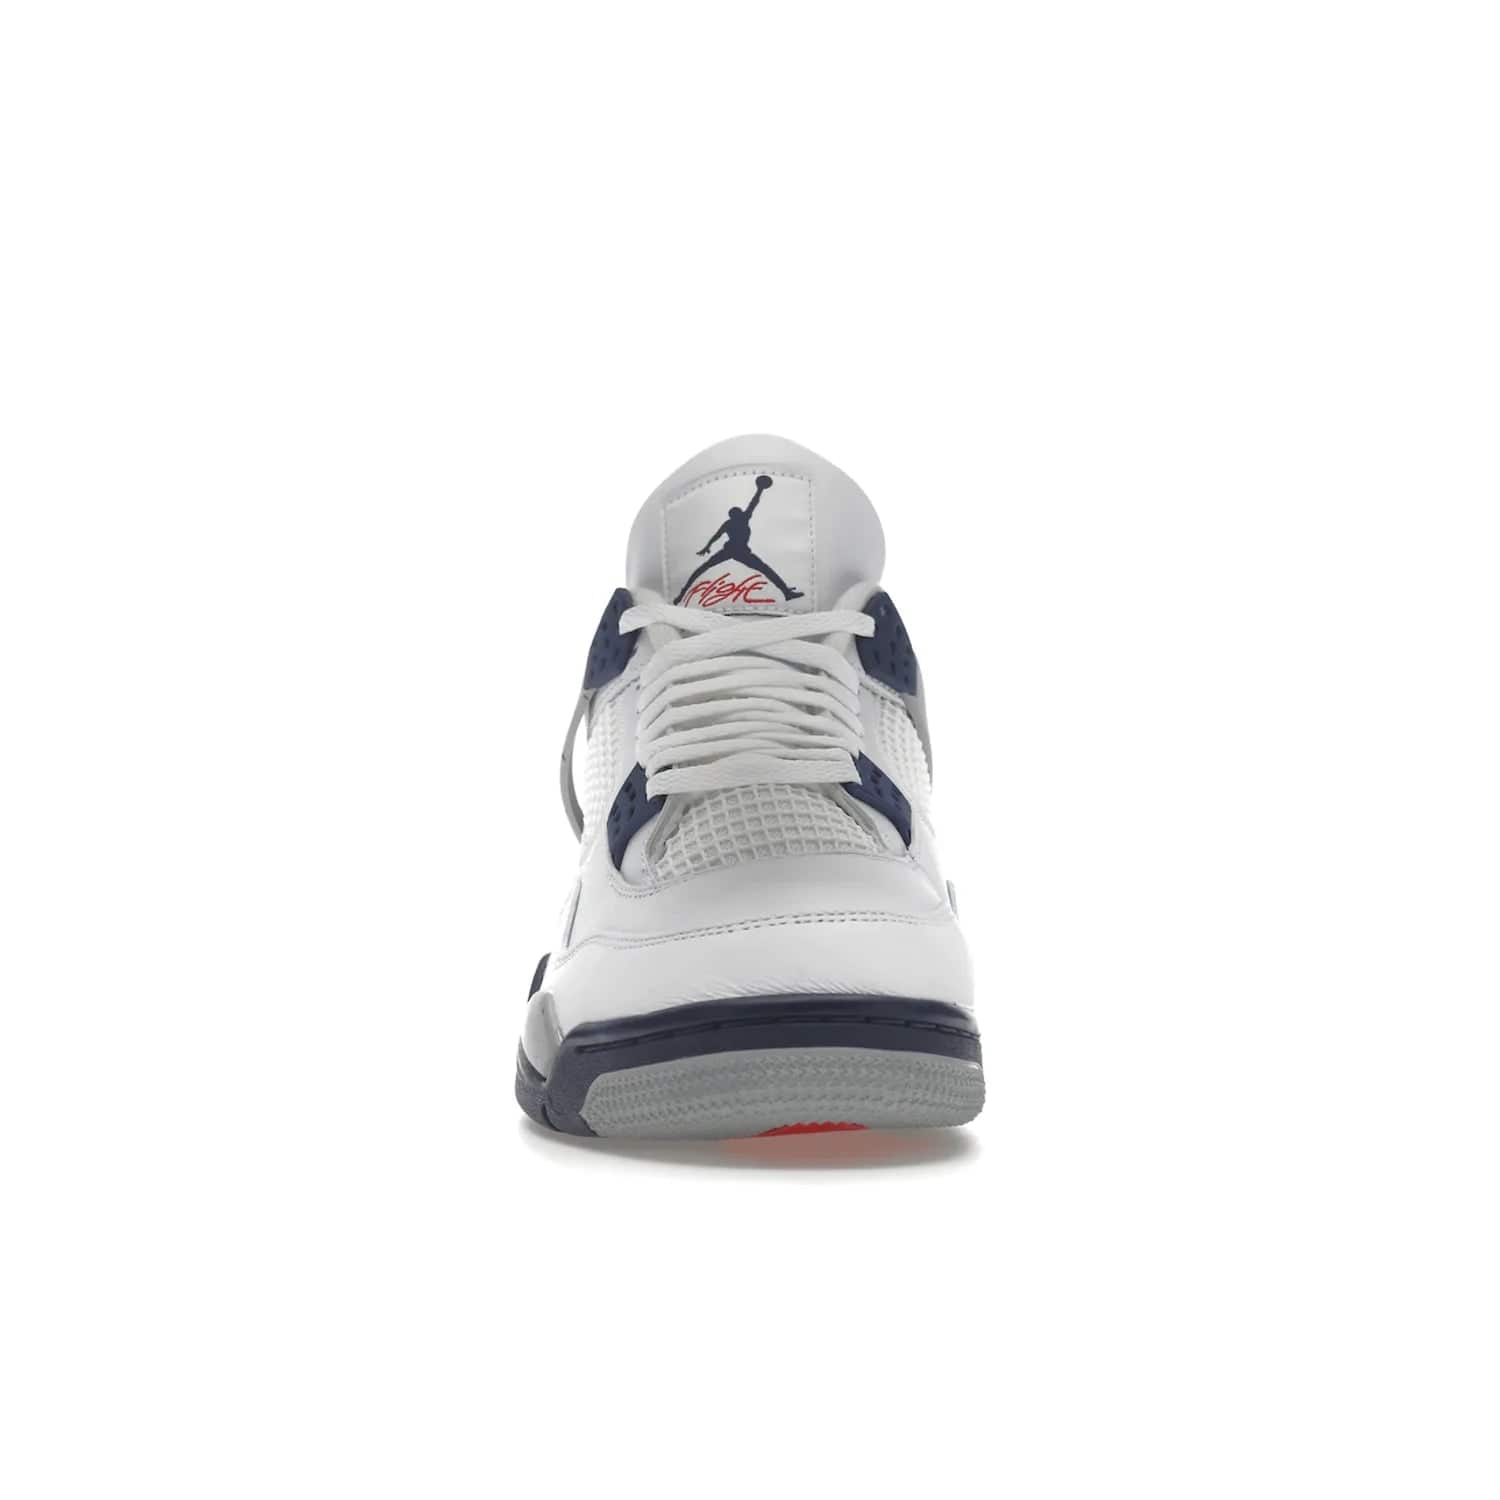 Jordan 4 Retro Midnight Navy - Image 10 - Only at www.BallersClubKickz.com - Shop the Air Jordan Retro 4 White Midnight Navy. Stand out with a classic white leather upper, black support wings, midnight navy eyelets, and Crimson Jumpman tongue tag. Unbeatable comfort with two-tone polyurethane midsole with encapsulated Air technology. Get yours before October 29th, 2022.